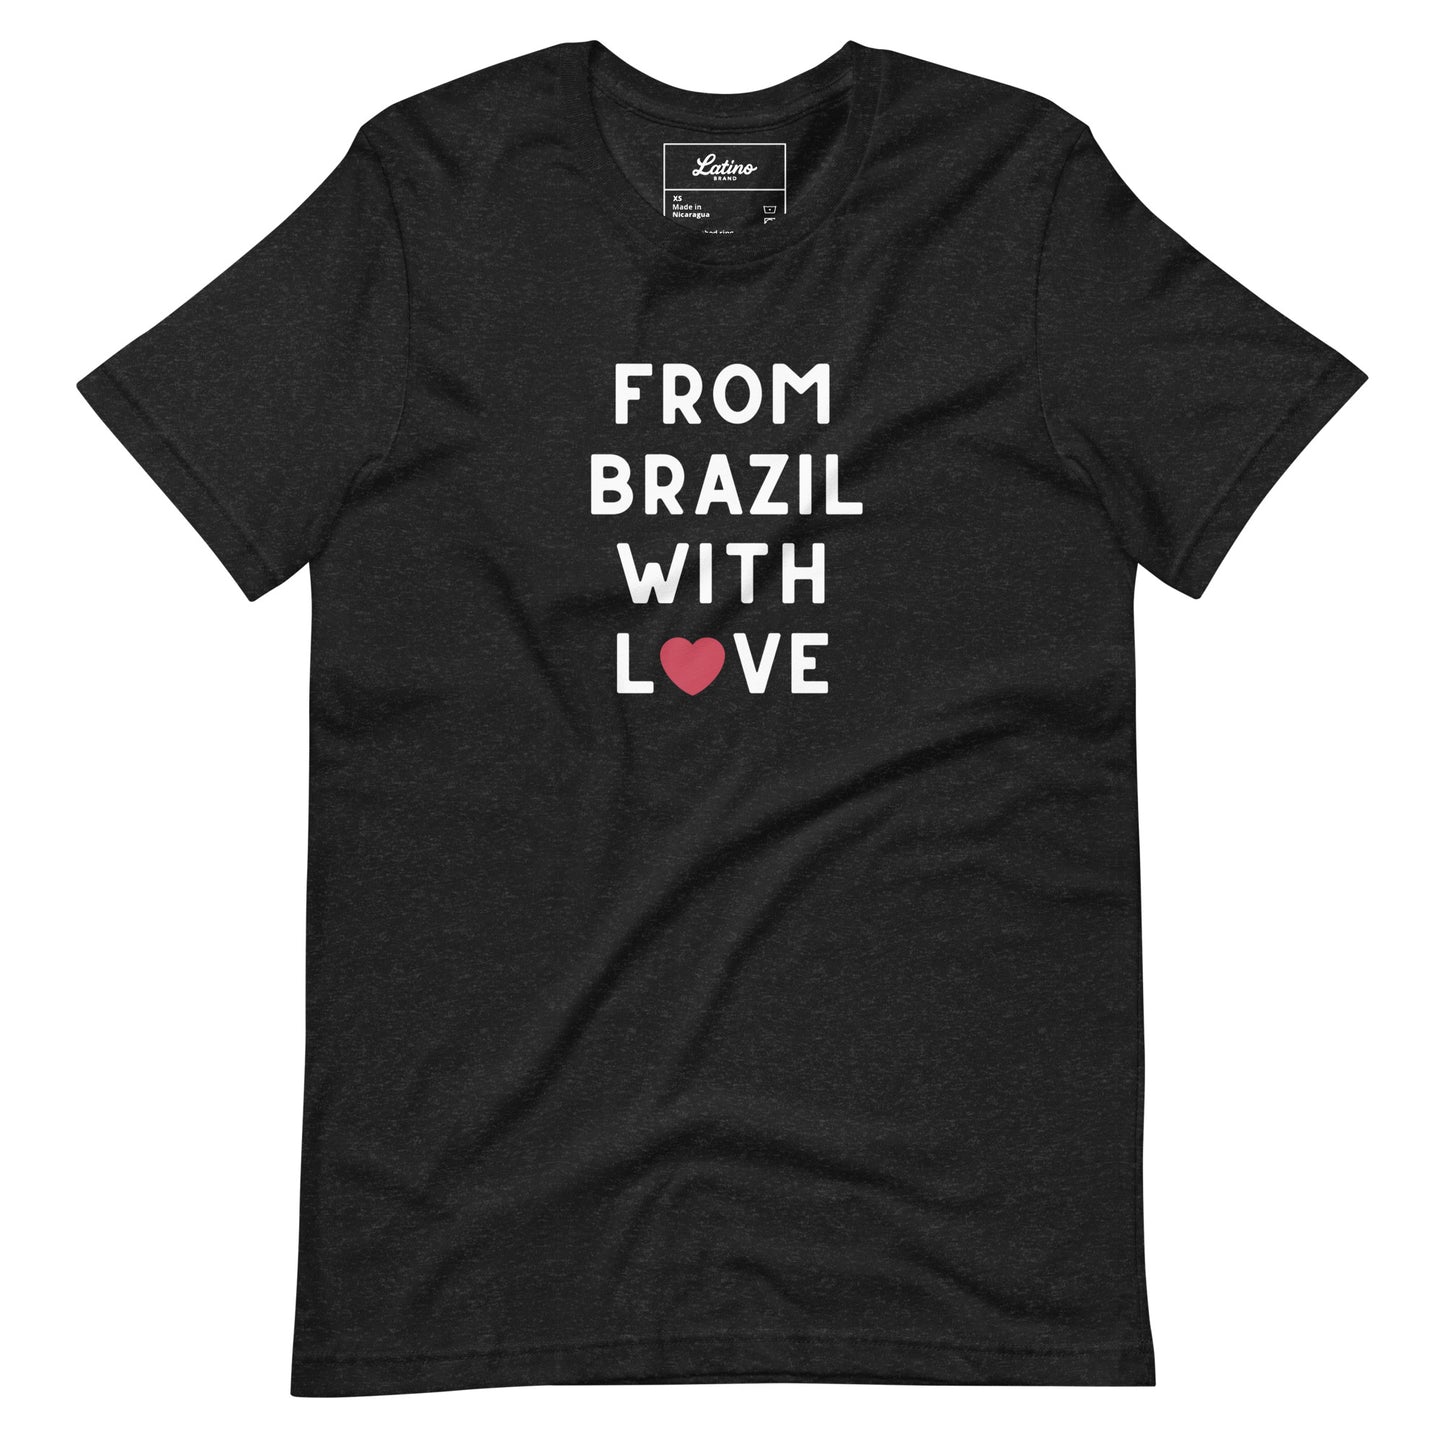 🇧🇷 From Brazil With Love